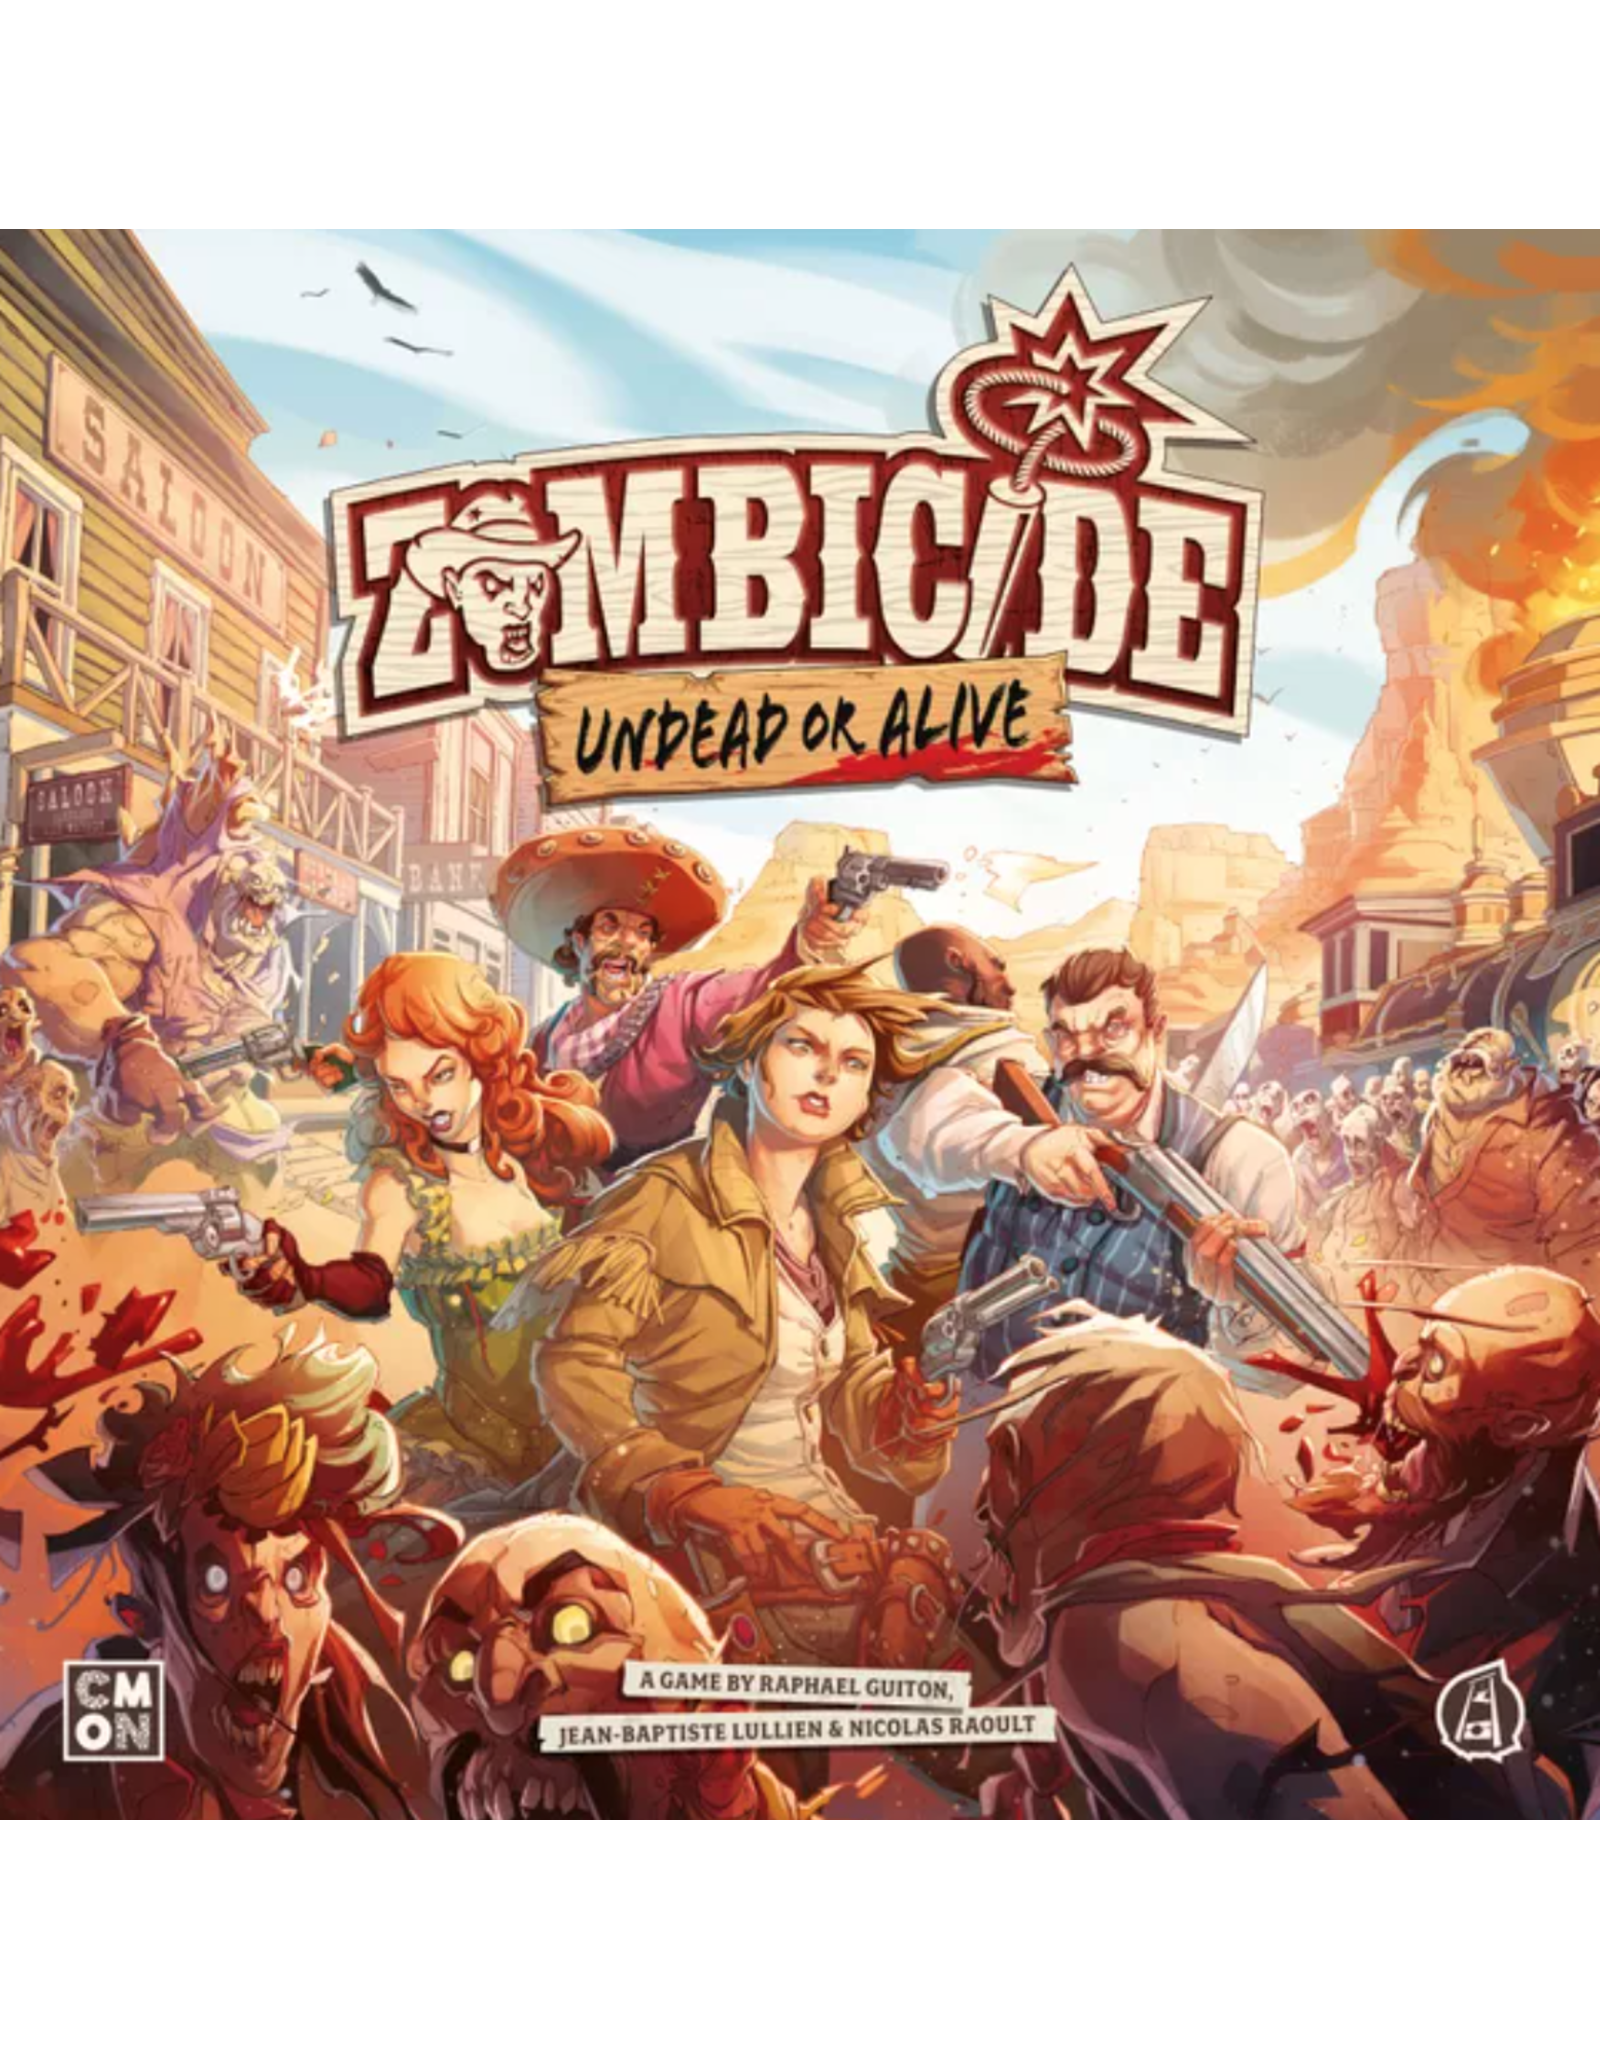 Cool Mini or Not Zombicide: Undead or Alive